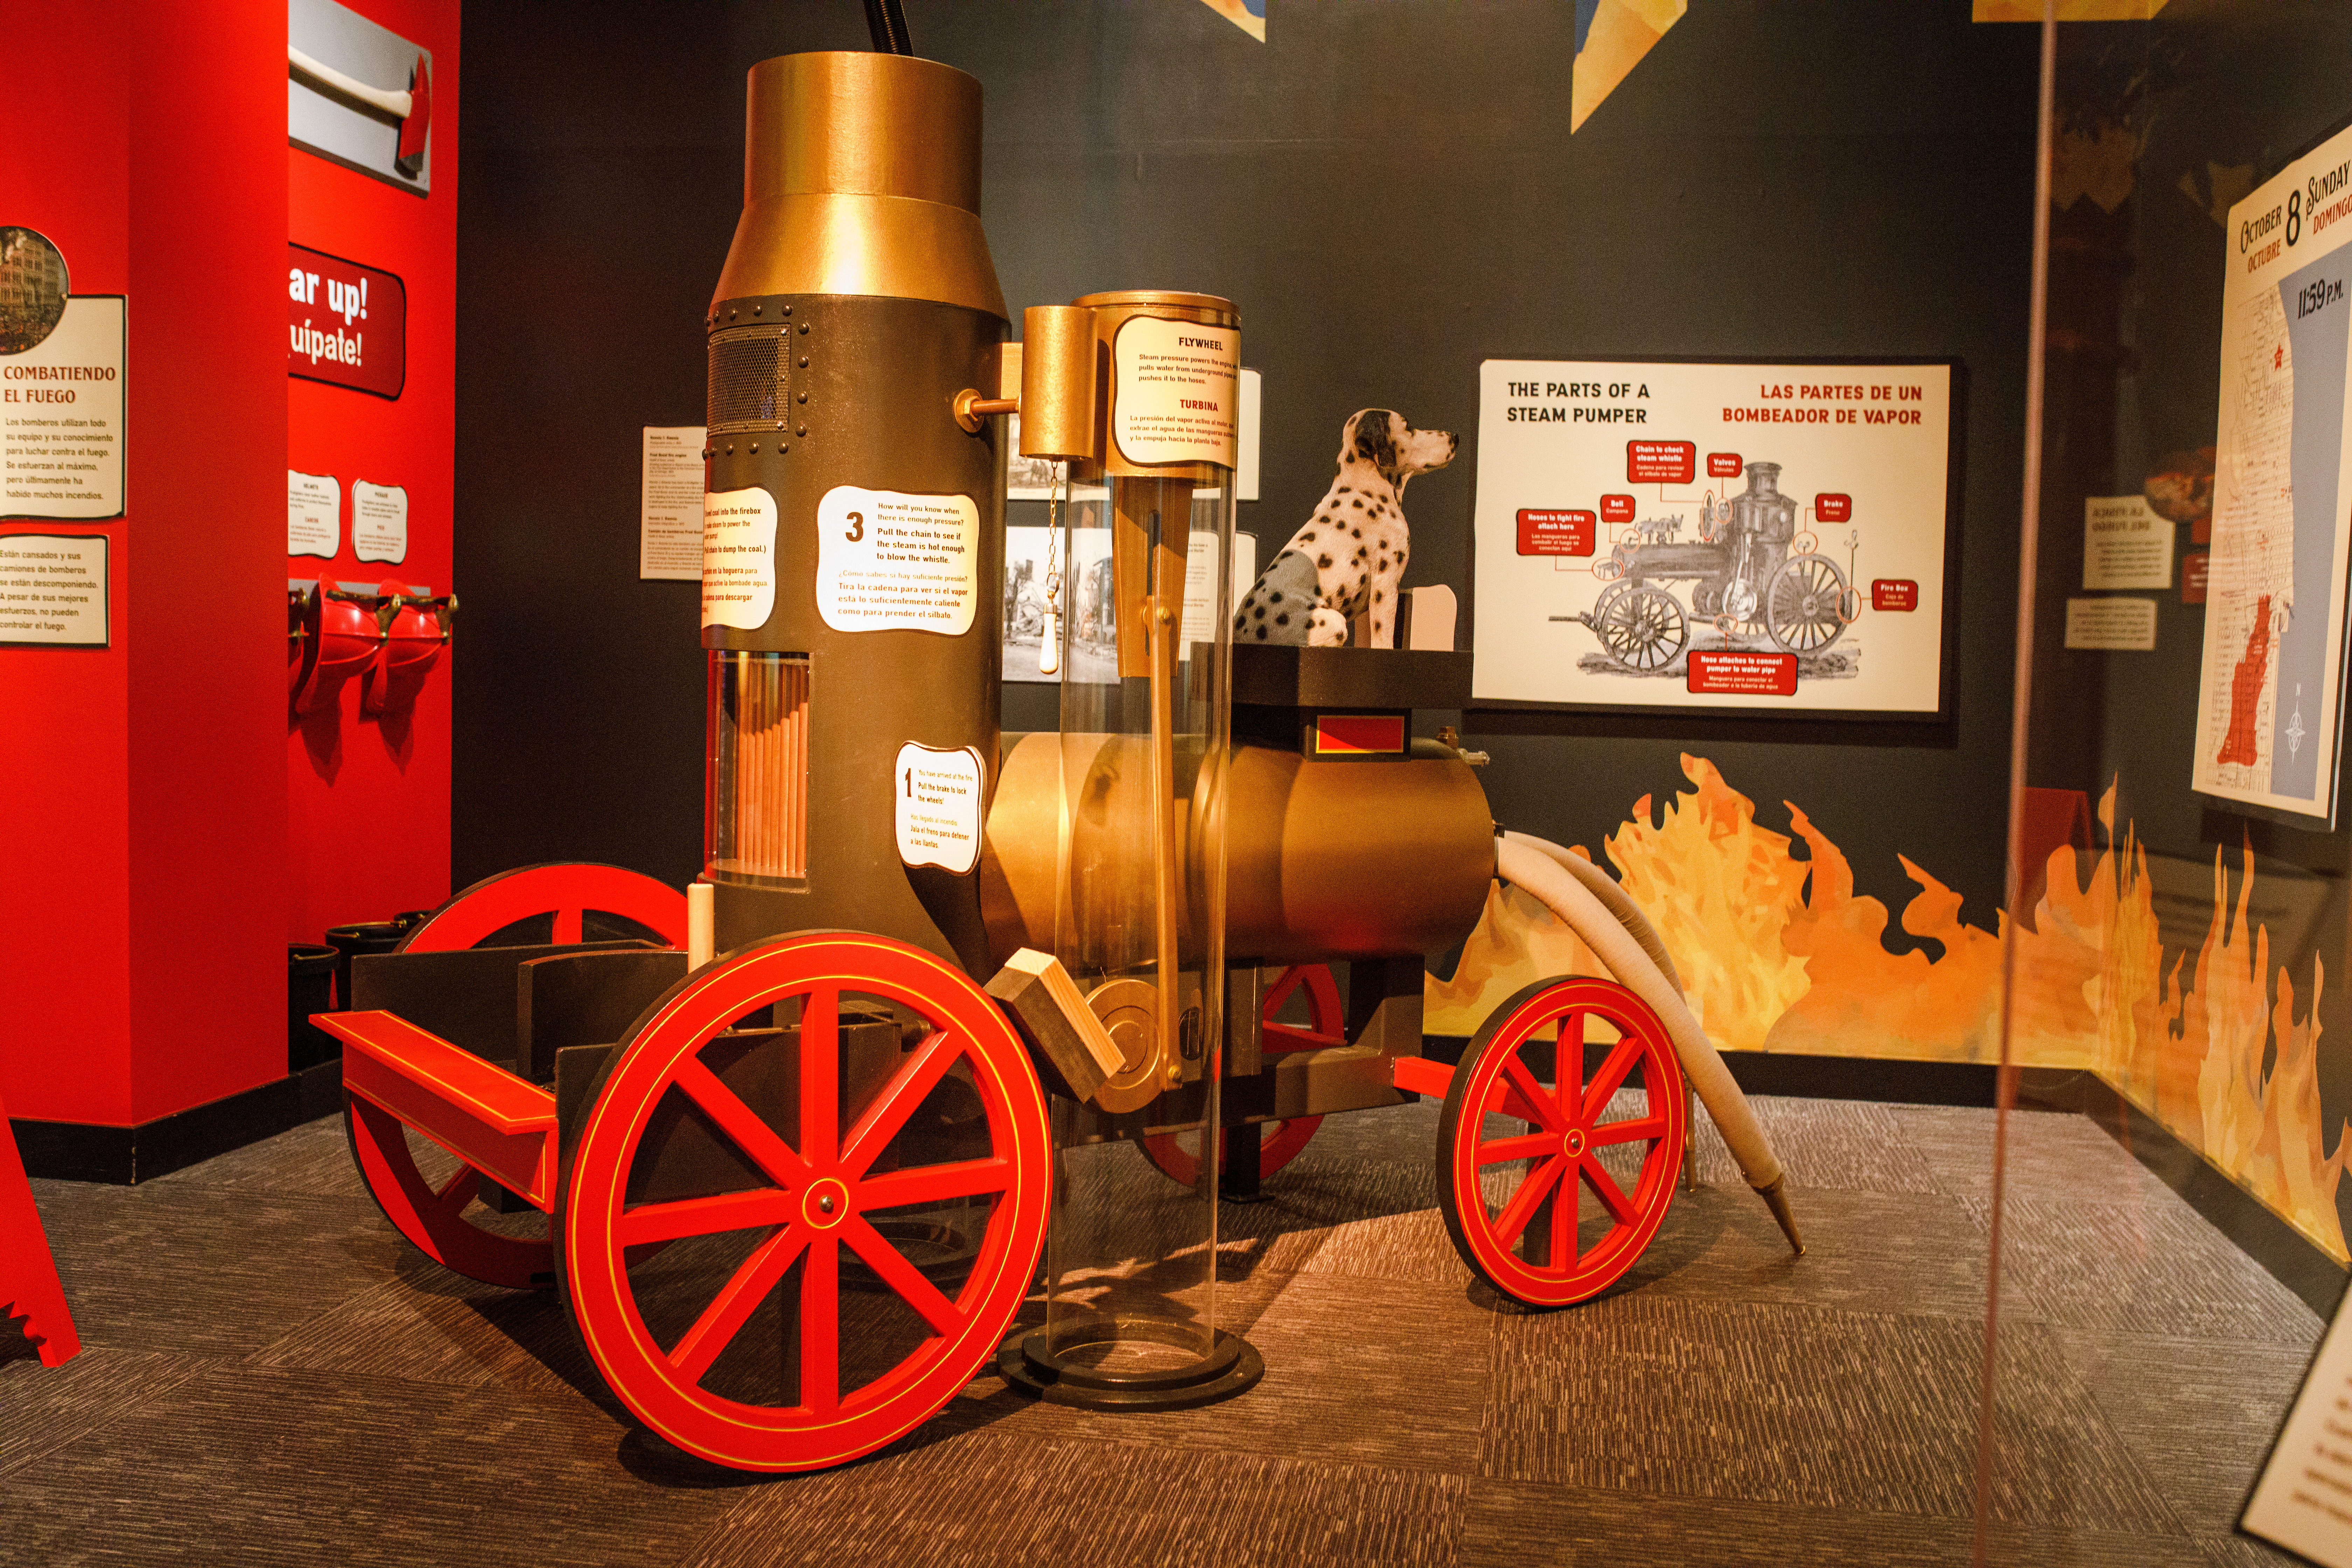 A model of a steam pumper is part of the City on Fire exhibition, opening Friday, Oct. 8, 2021 at the Chicago History Museum in Lincoln Park.